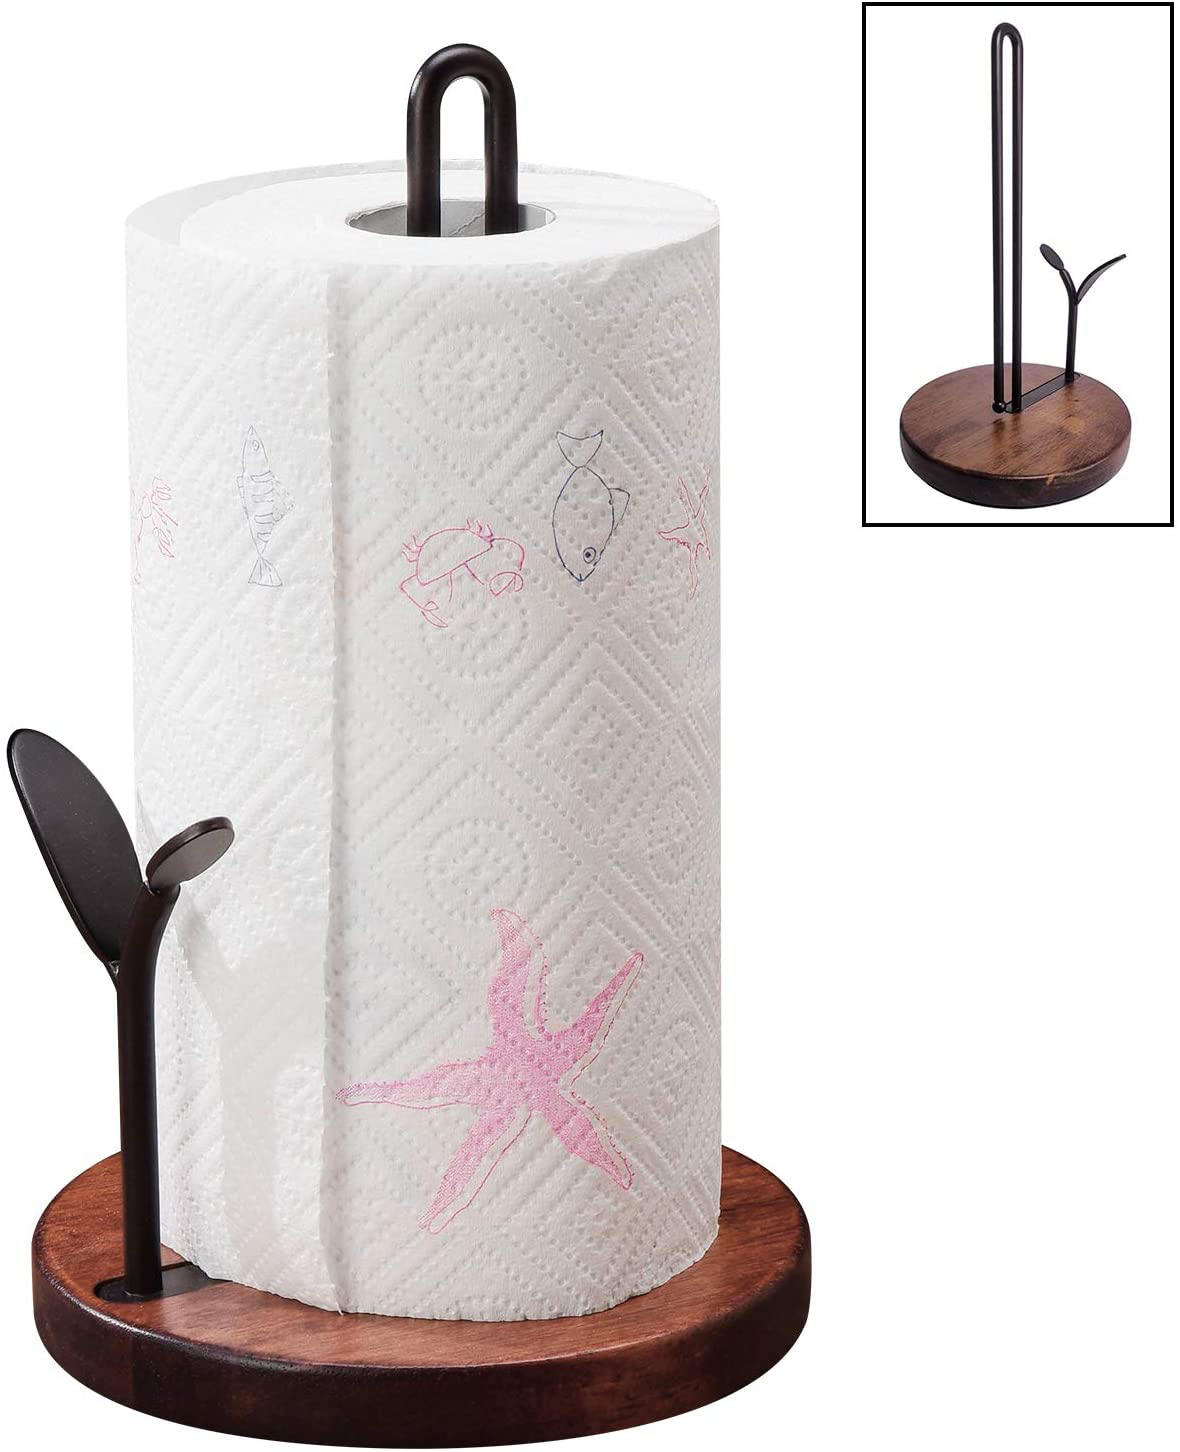 Paper Towel Holder Countertop, Paper Towel Holder Stand Wood Base Rustic Standing Paper Towel Holder for Kitchen Countertop and Dining Room Table